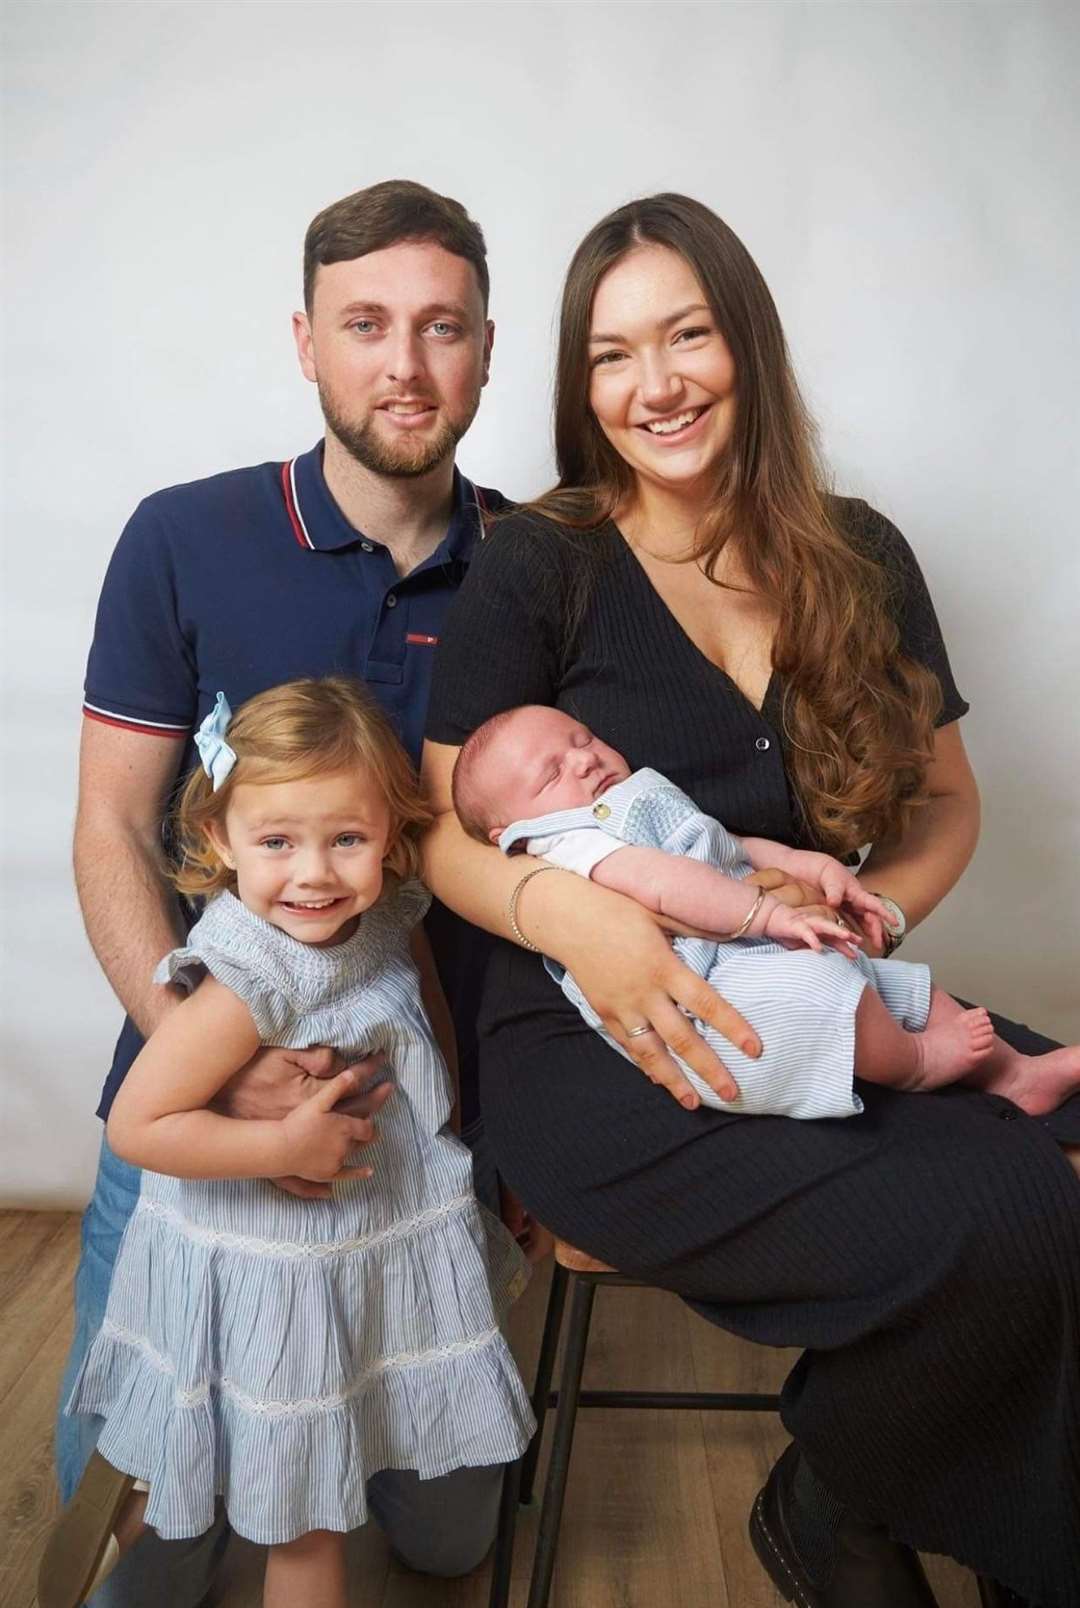 Rosie Taylor holding her son, Albert, with her partner Robbie Stevenson, and their daughter Ivie